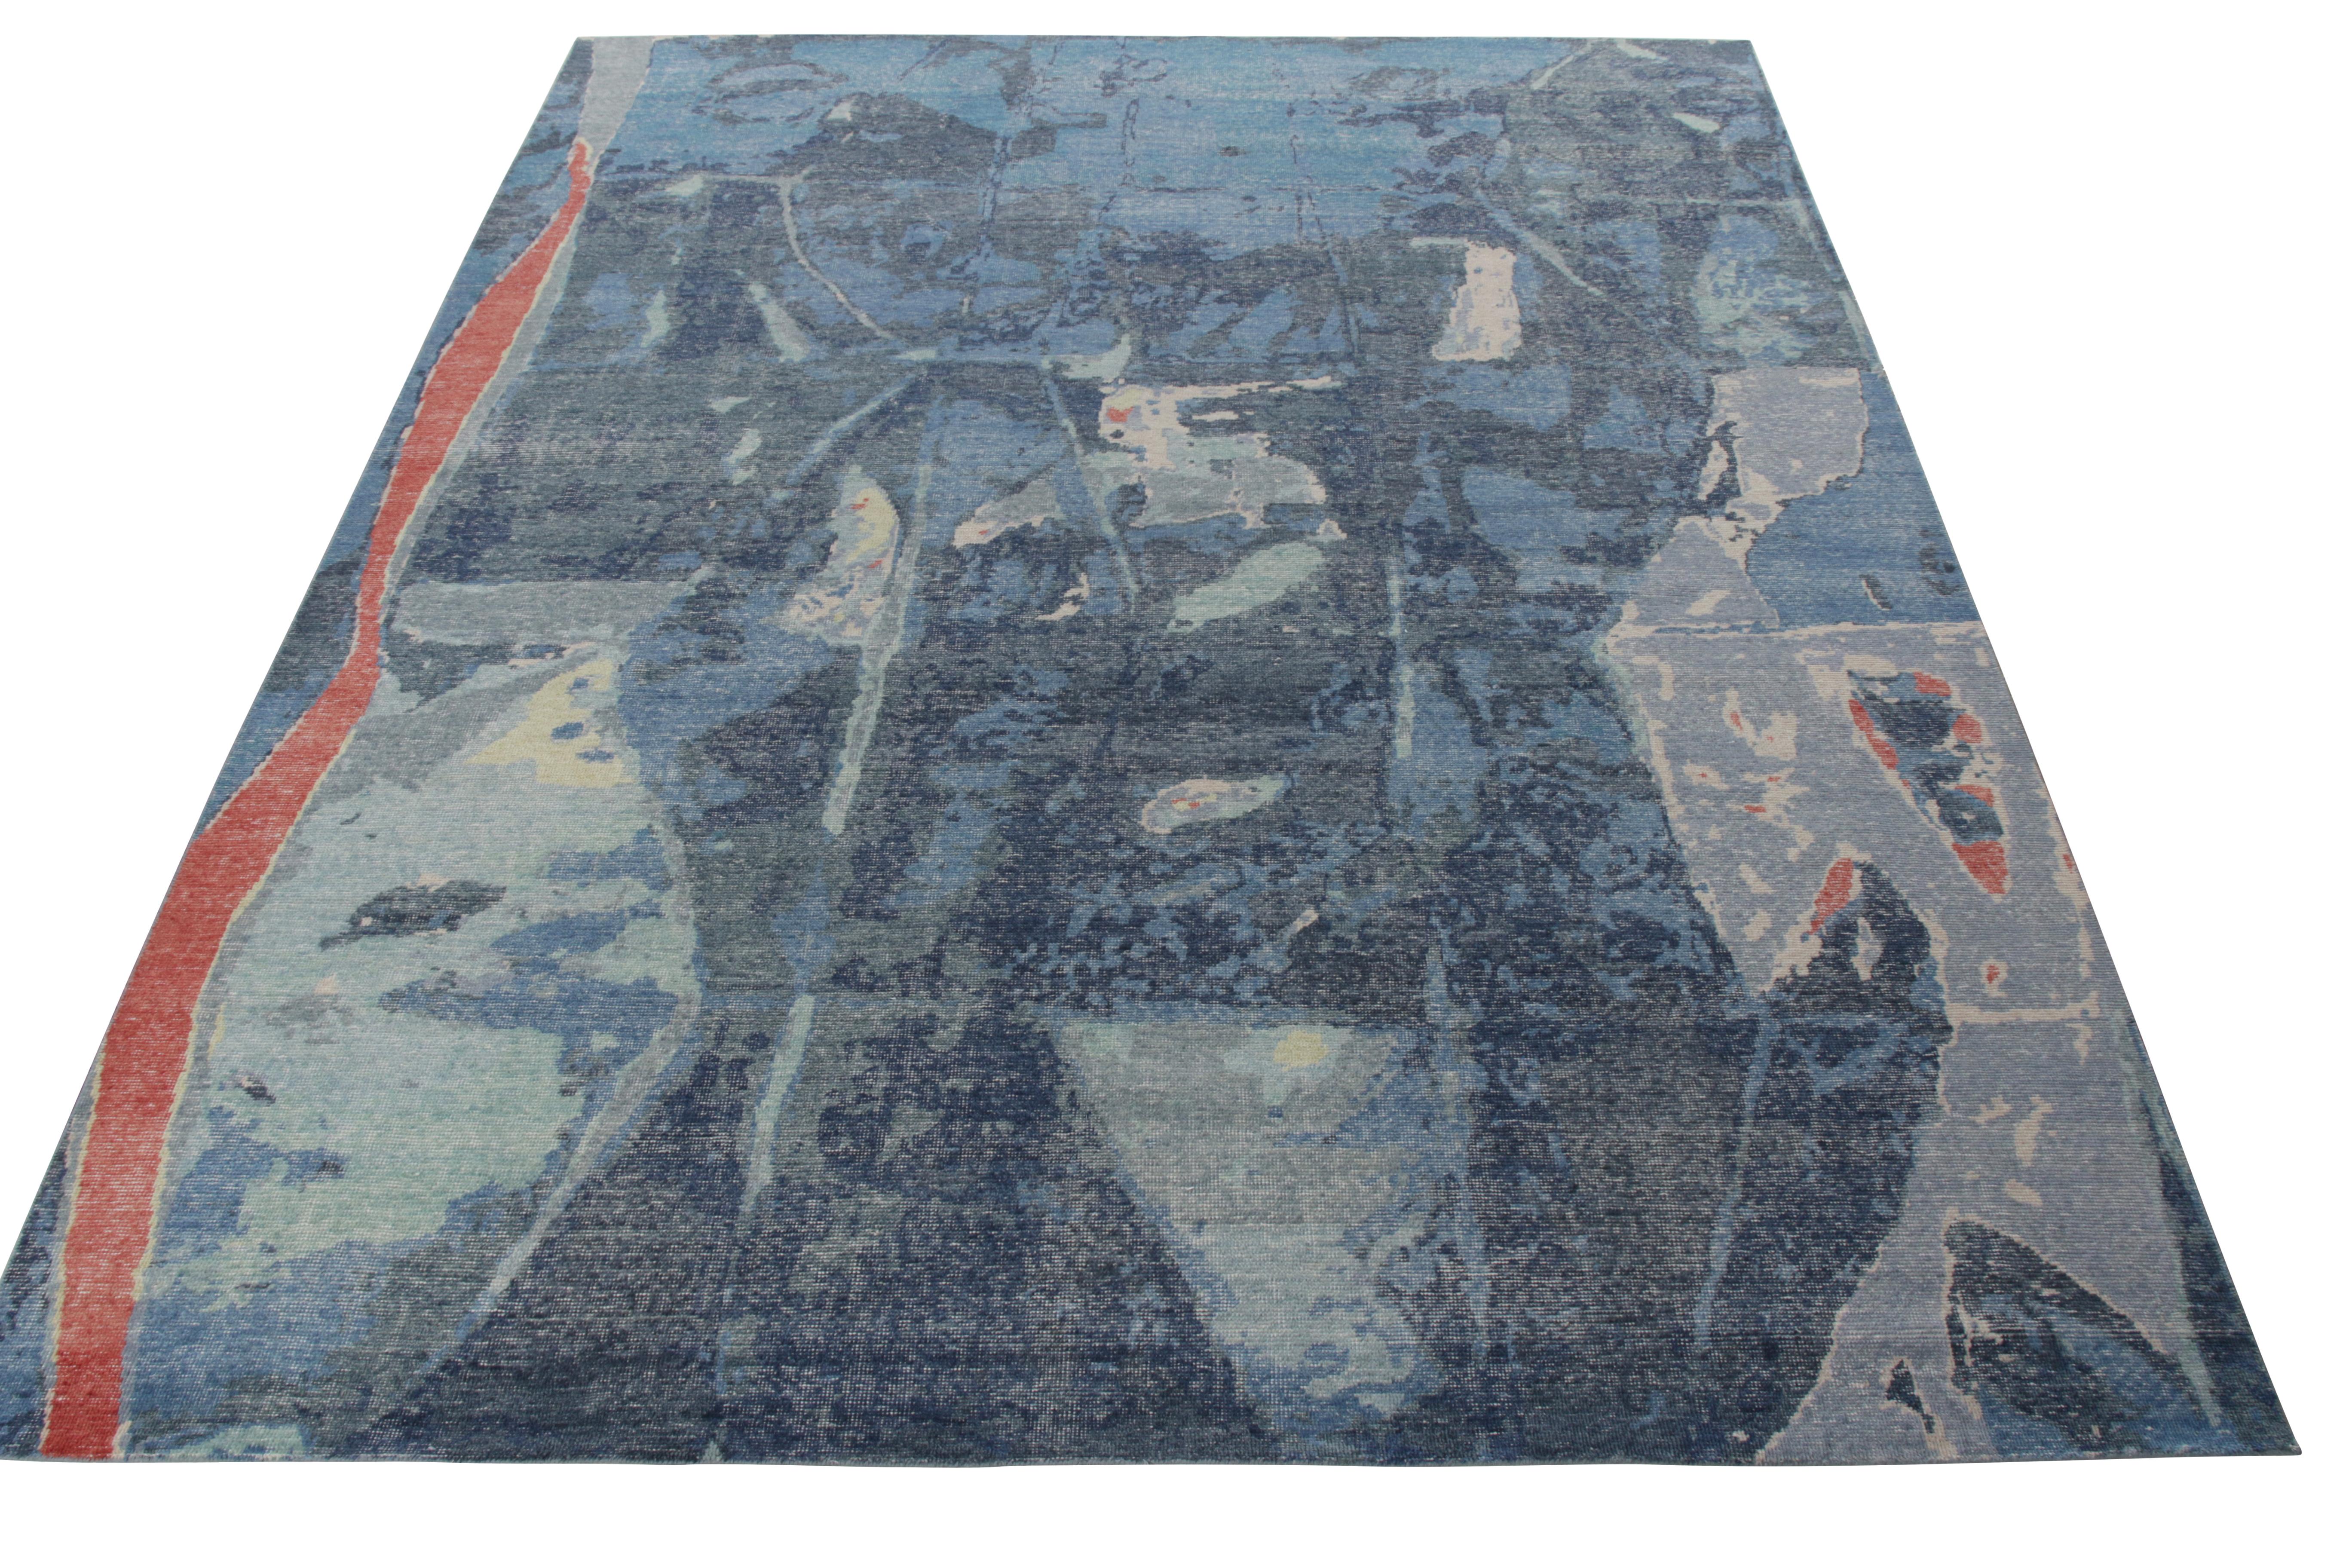 Rug & Kilim brings to you its exclusive distressed take on modern styles from its Homage Collection. Exemplified in this 9x12, this hand-knotted custom abstract rug boasts an all over geometric pattern in contrasting shades of blue and red—all done